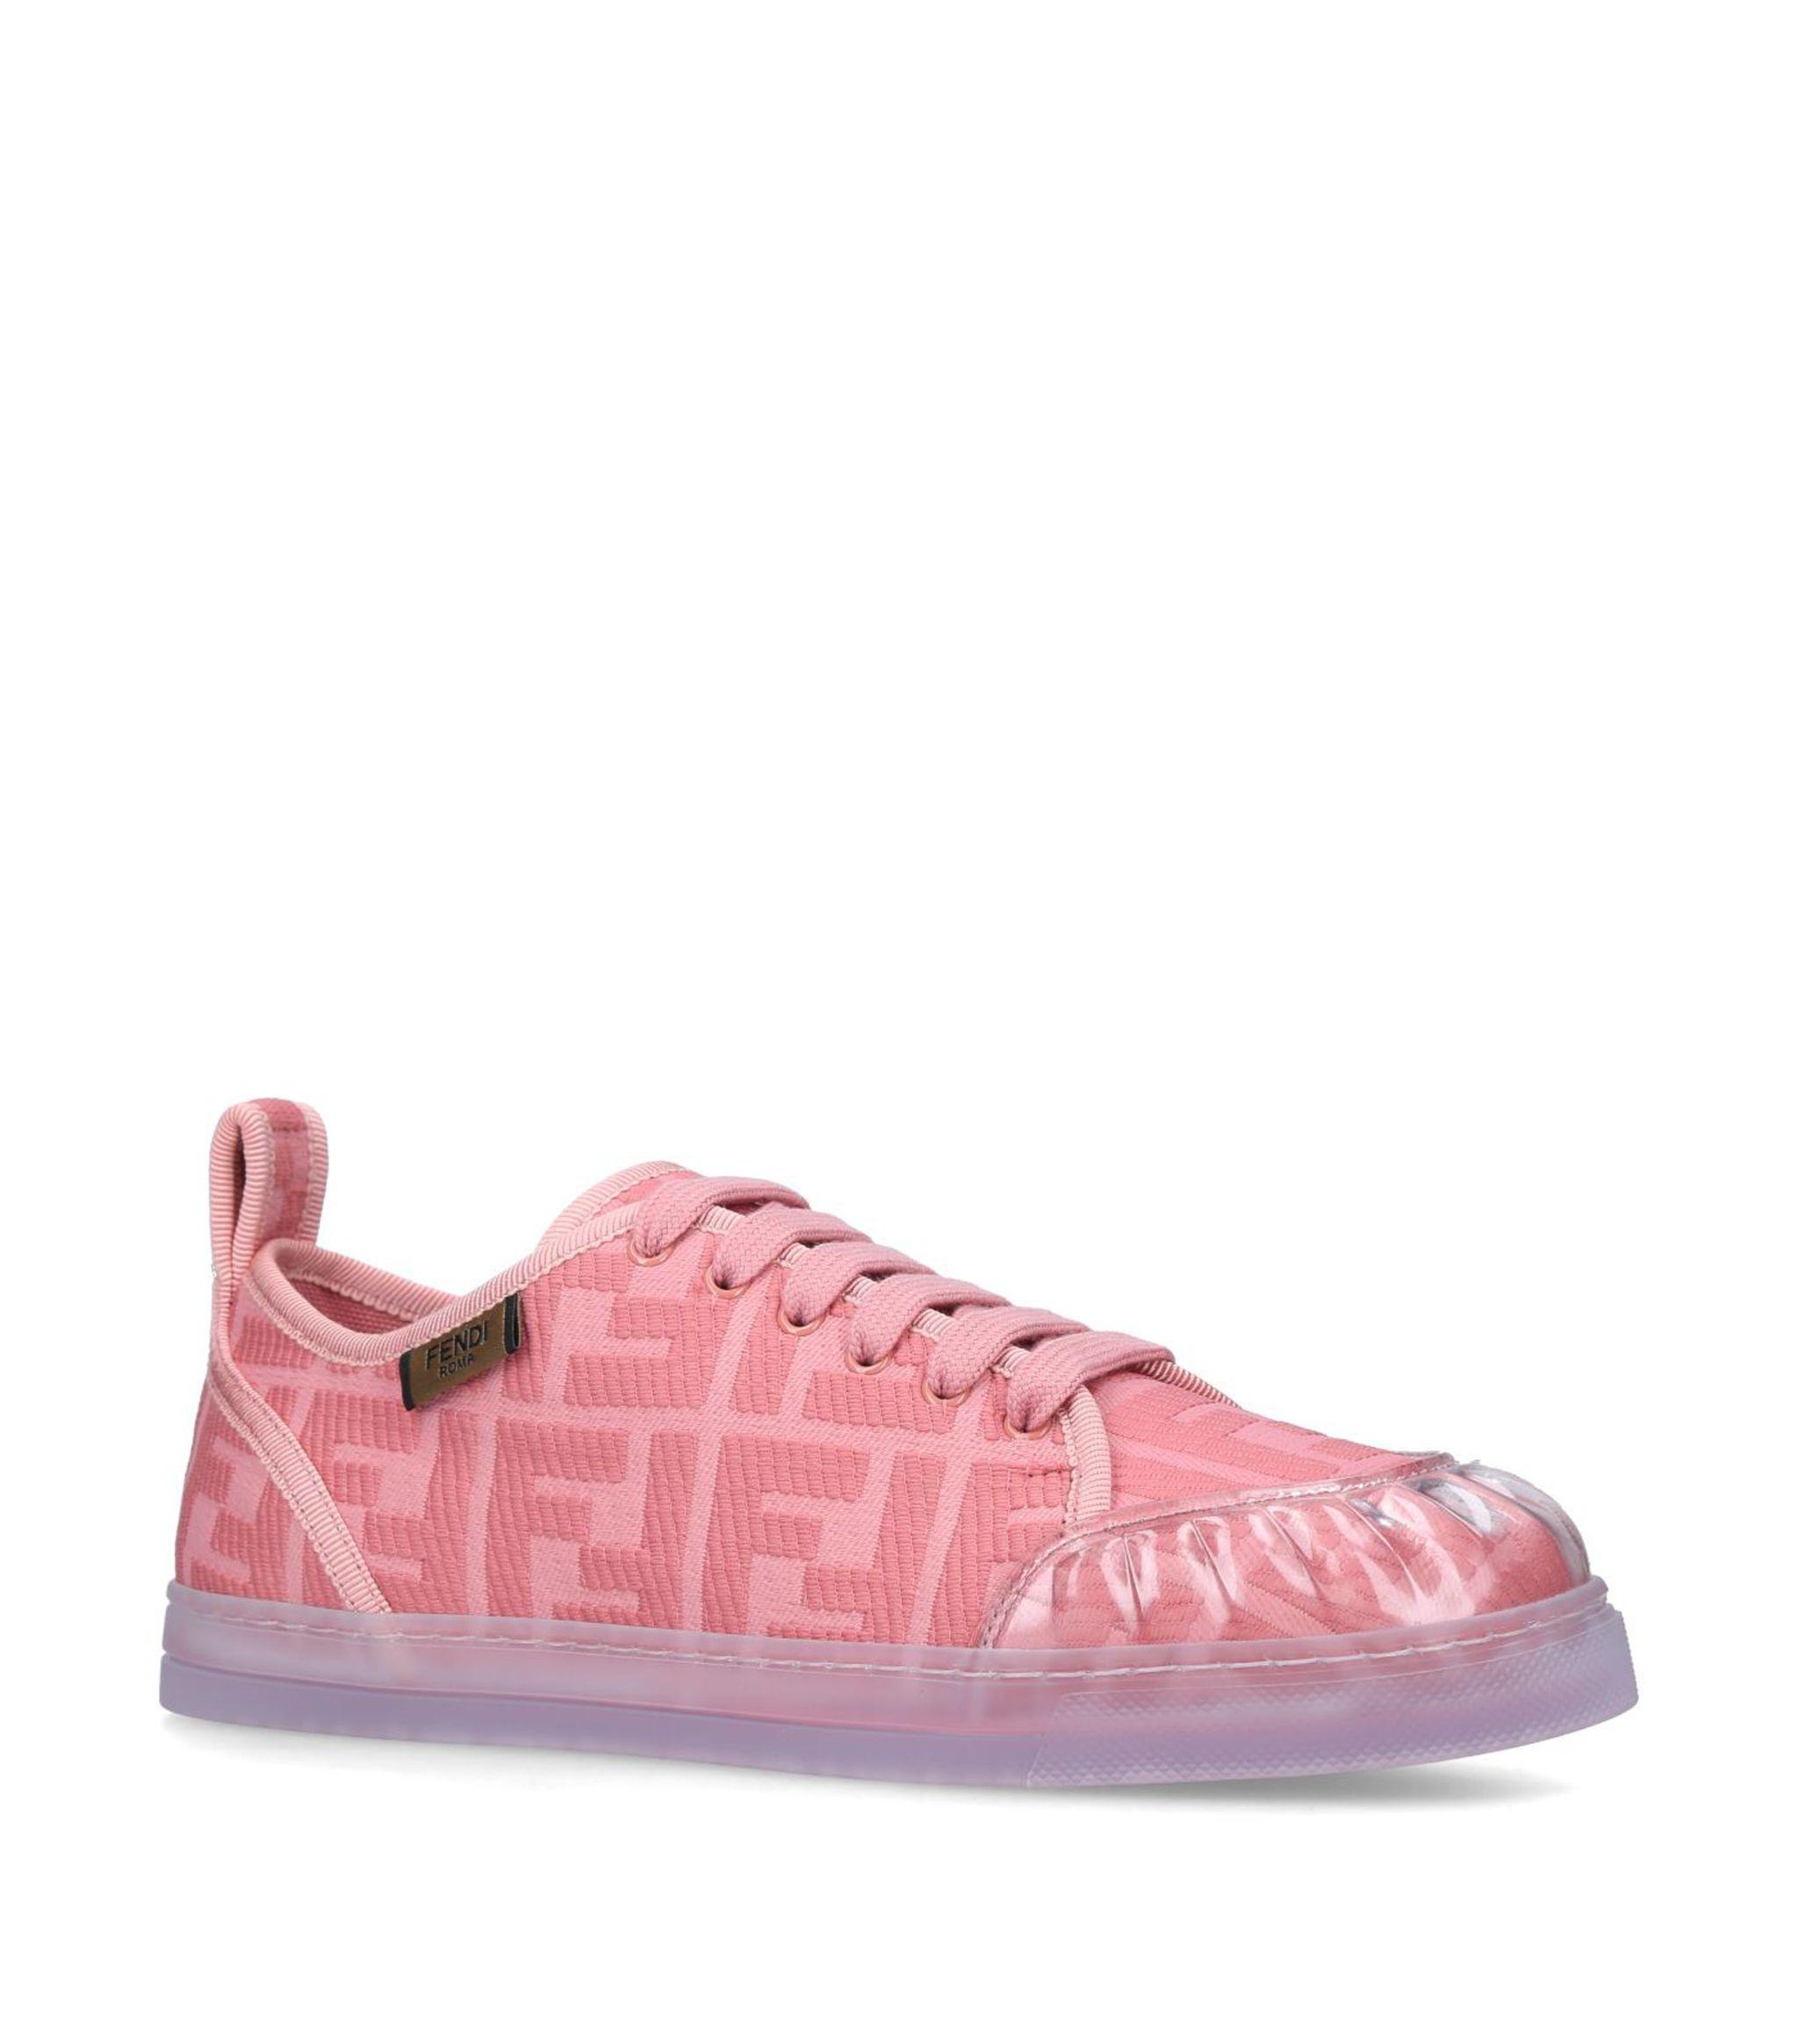 Fendi Promenade Ff Canvas Trainers in Pale Pink (Pink) - Save 26% - Lyst